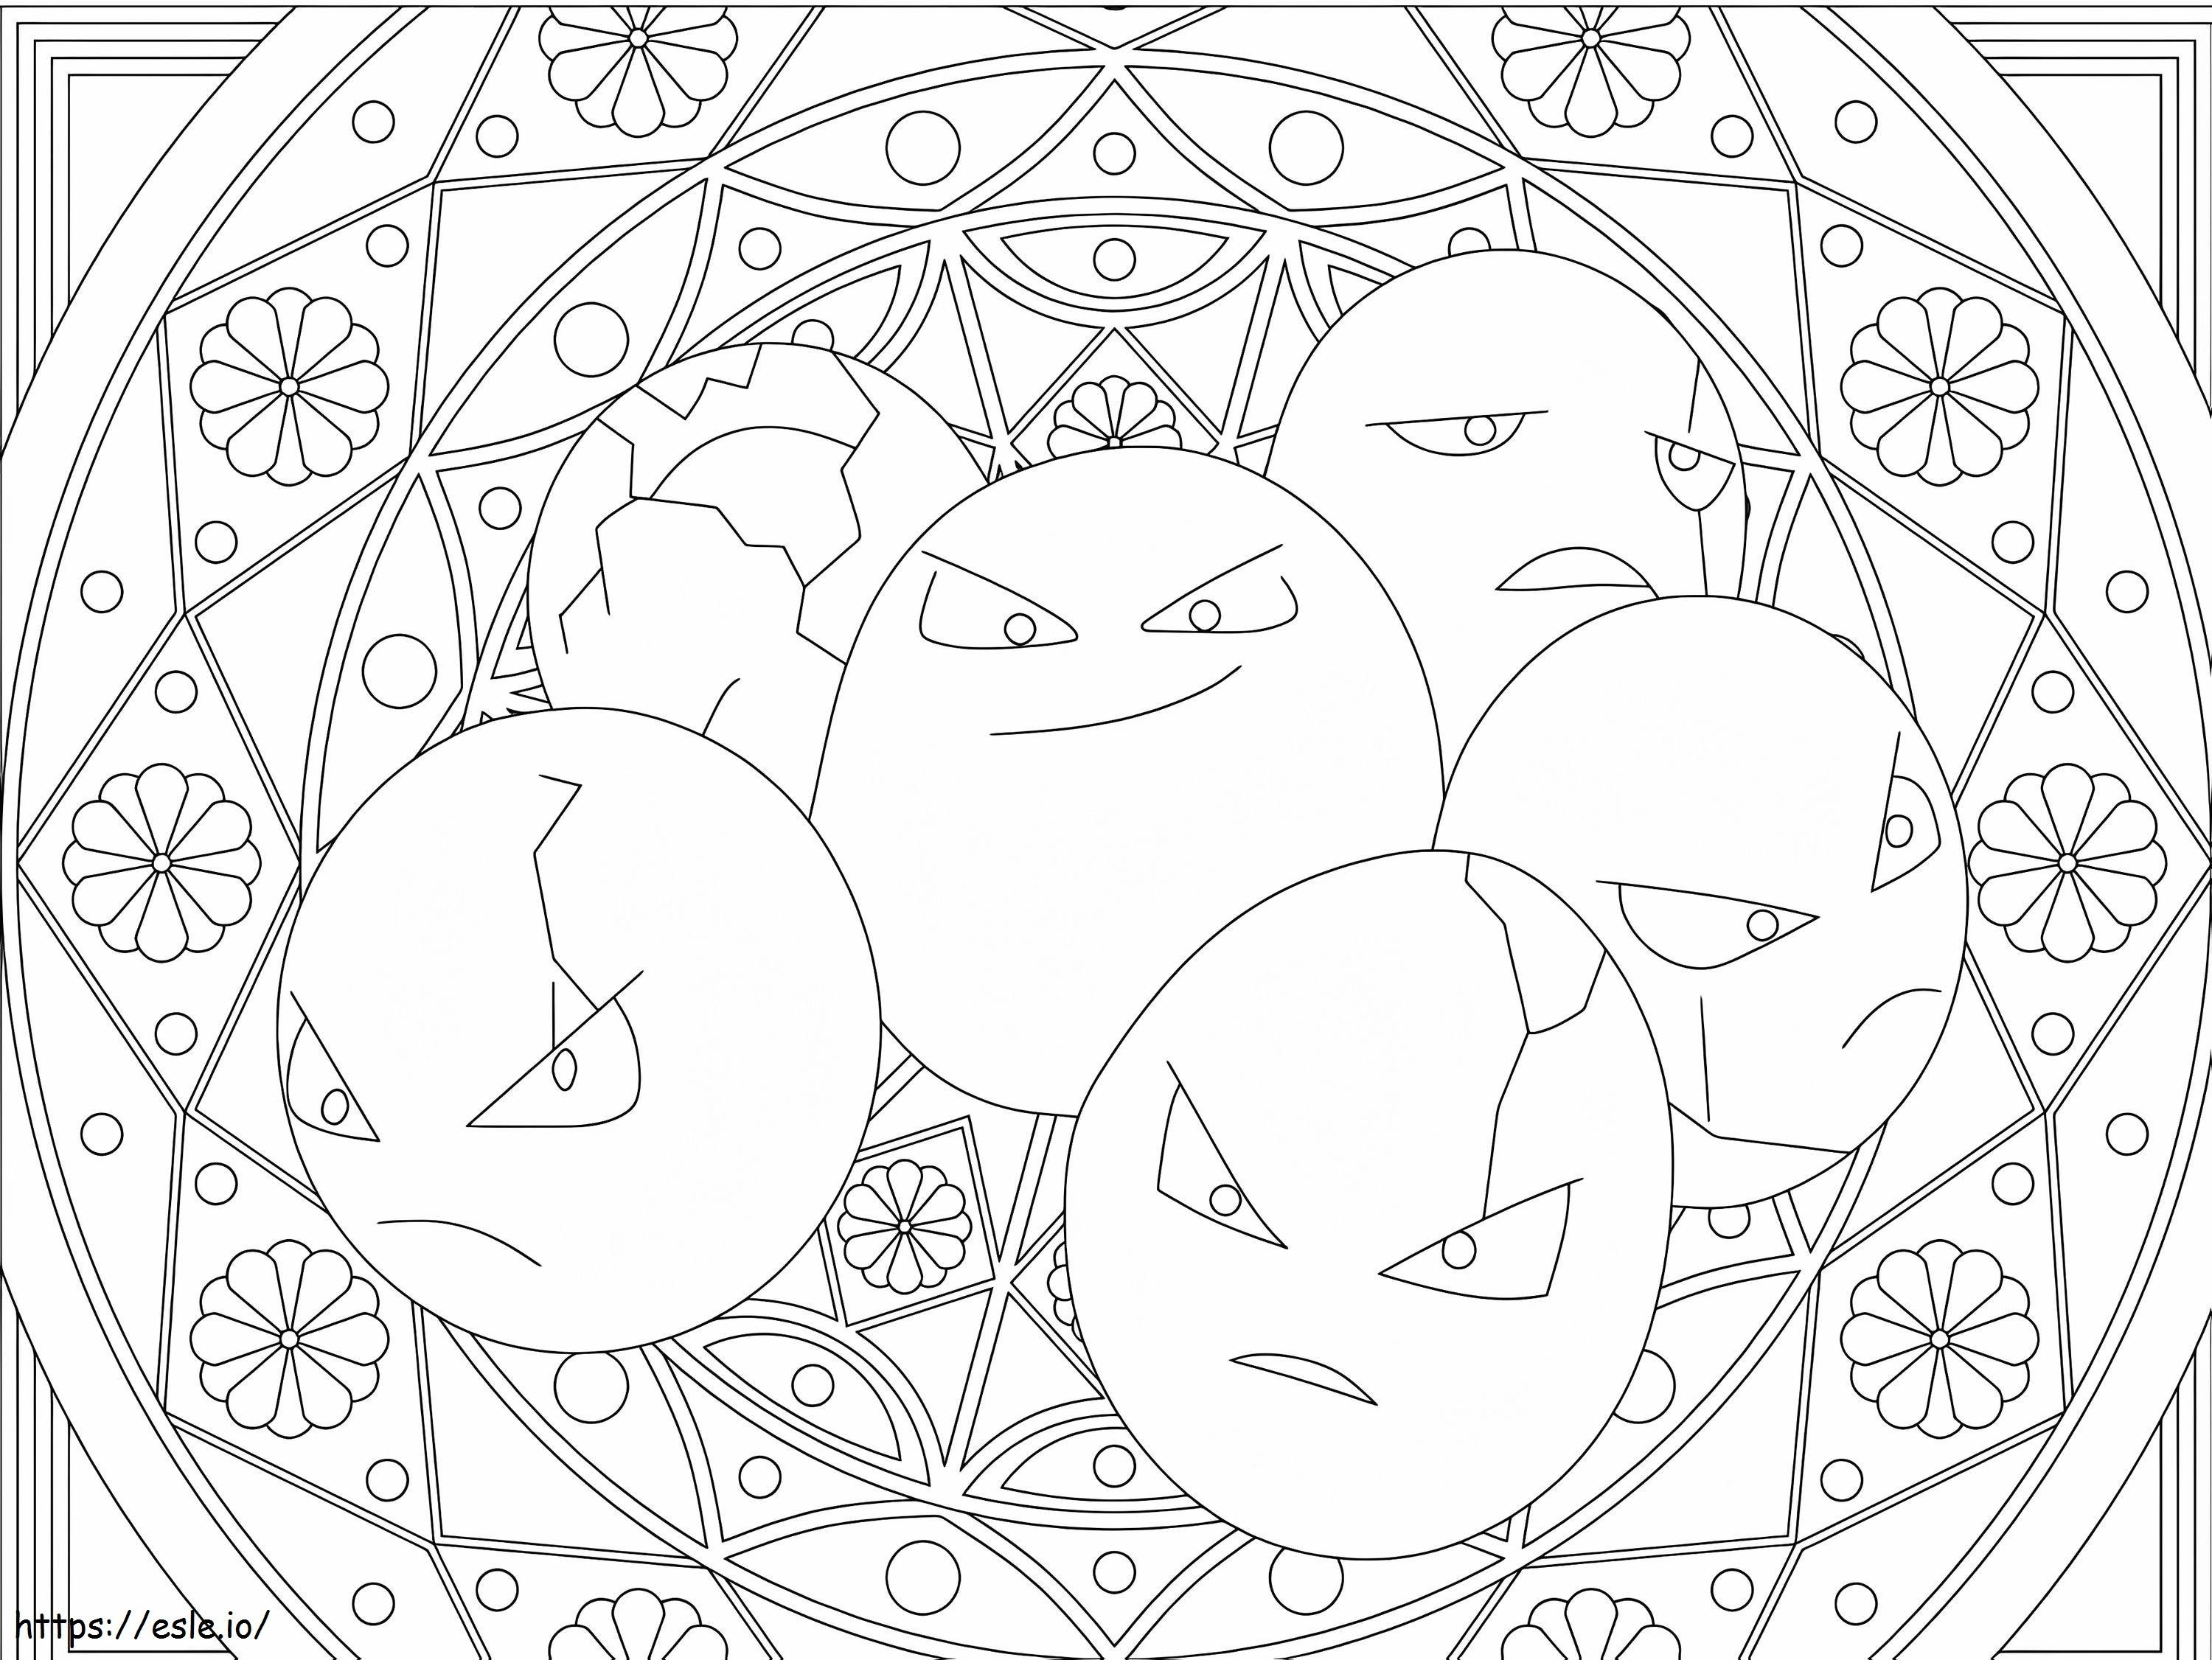 Exeggcute 5 coloring page